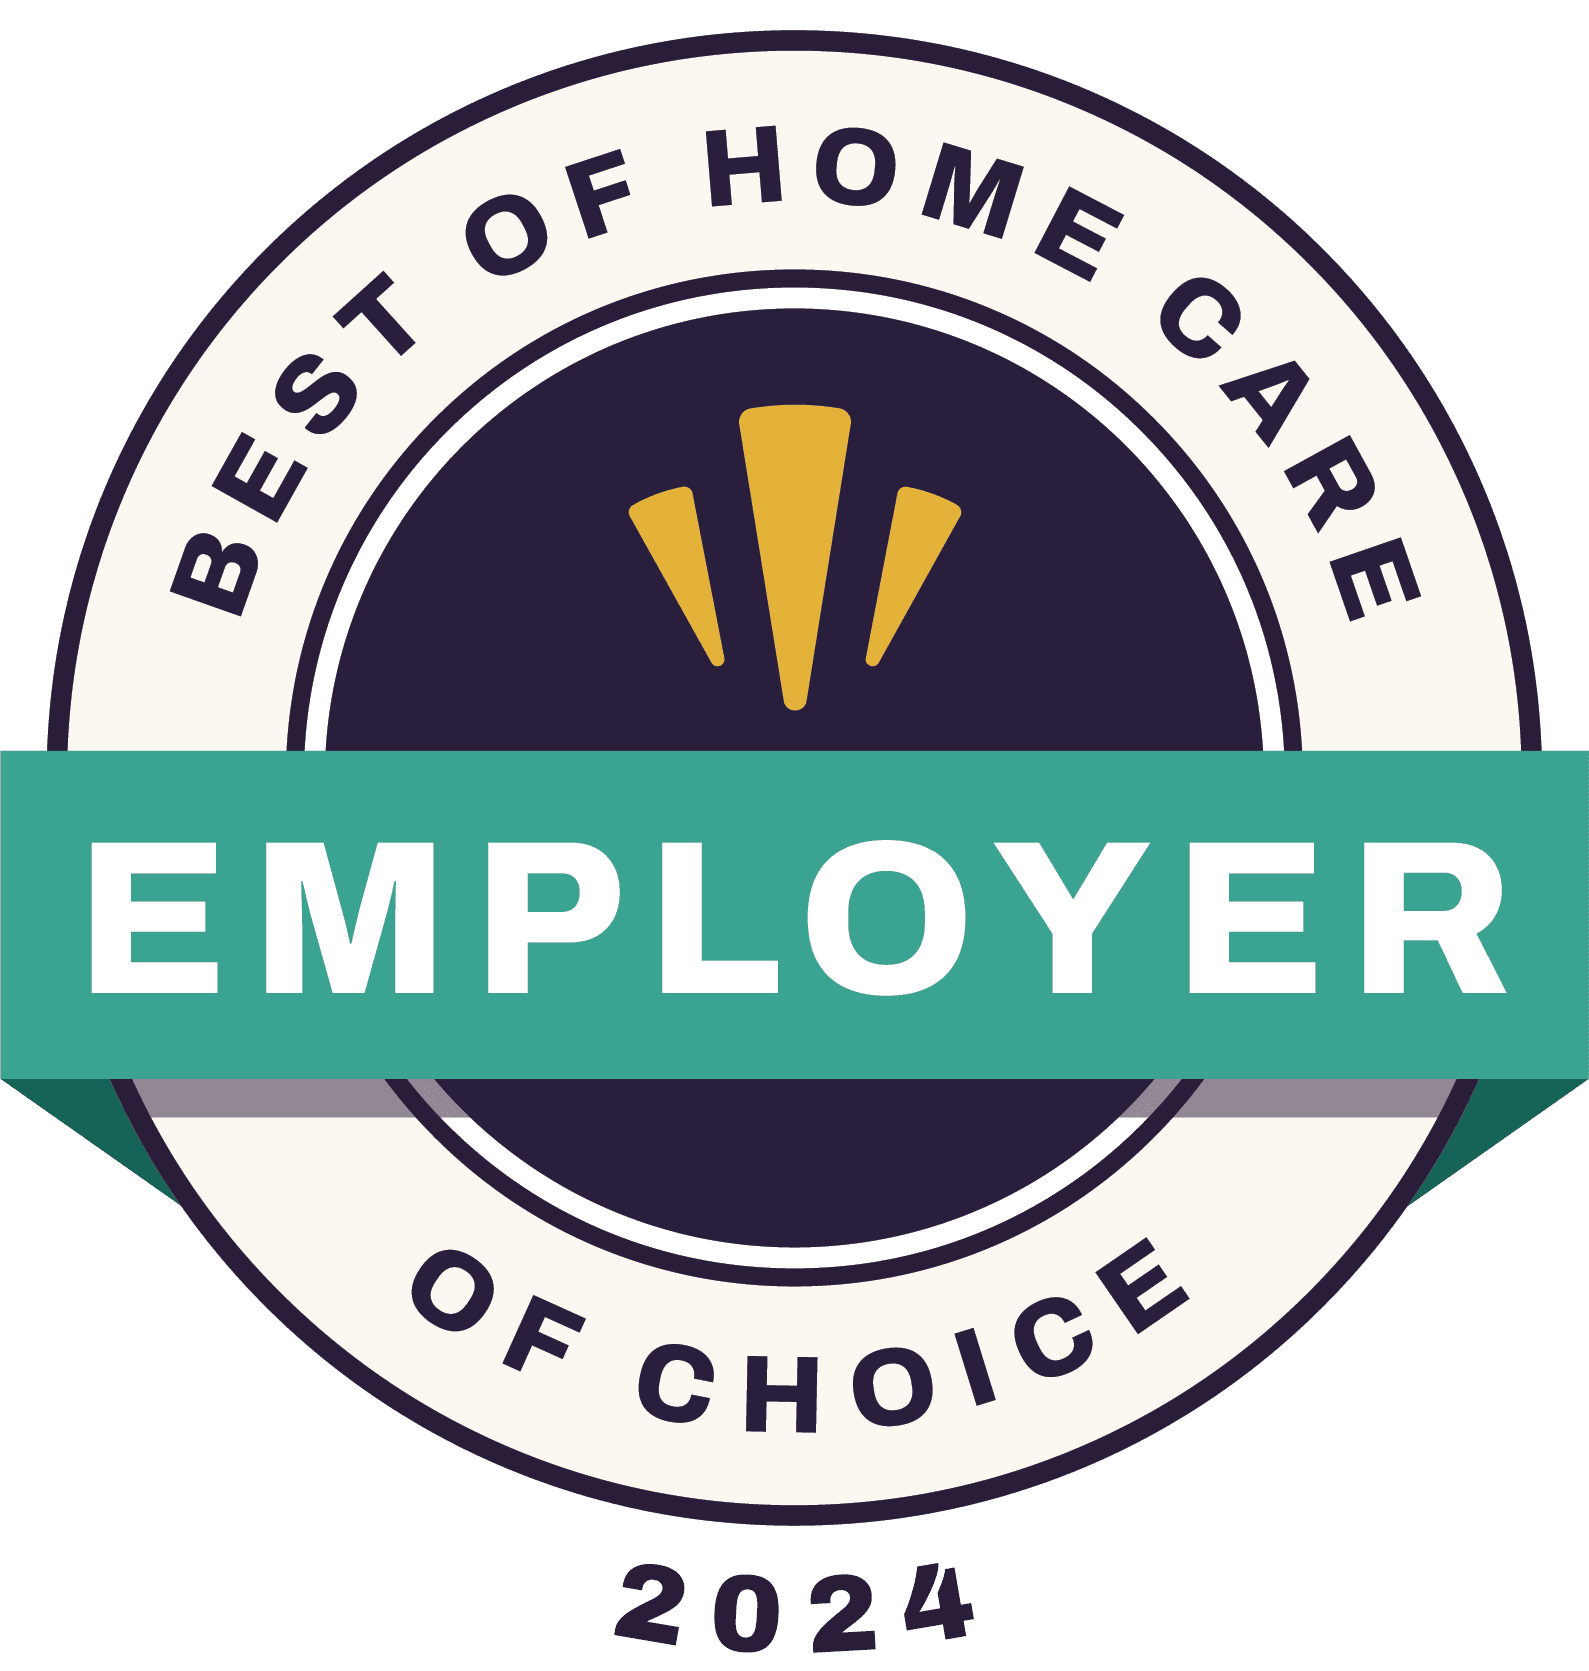 Employer of Choice 2024